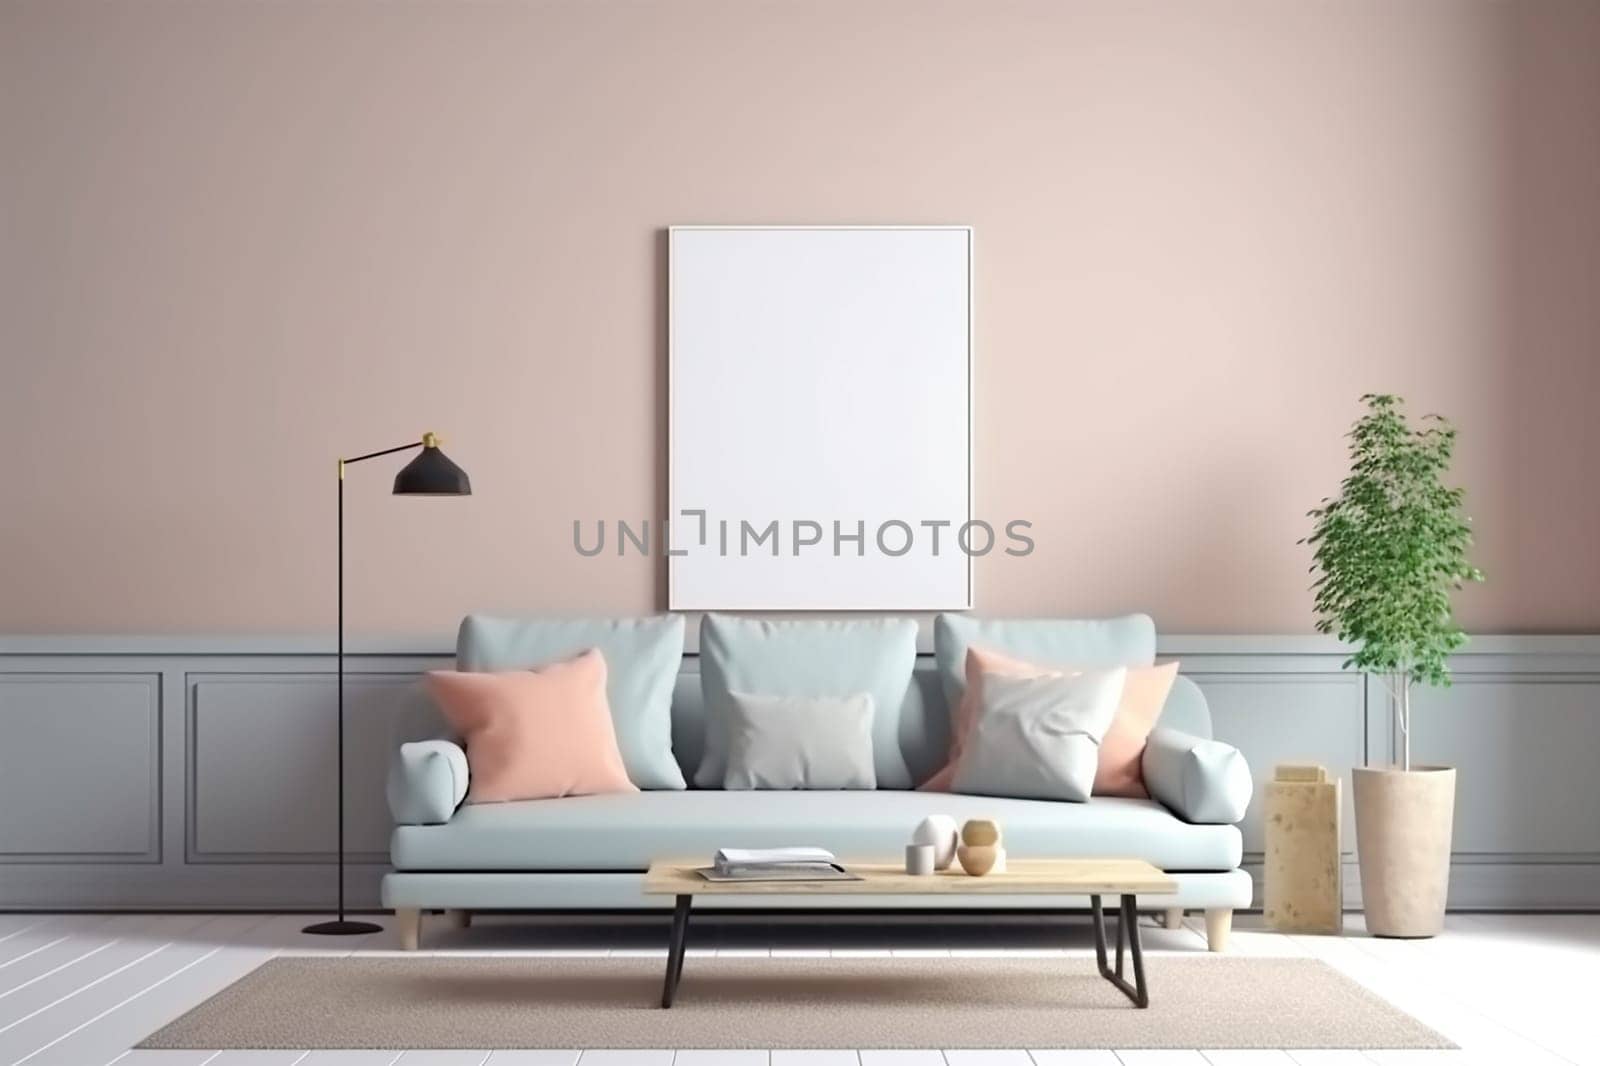 Mock up for a vertical frame, minimalist living room interior with a blank frame, gray sofa, indoor plant, and decorative vase on a side table.